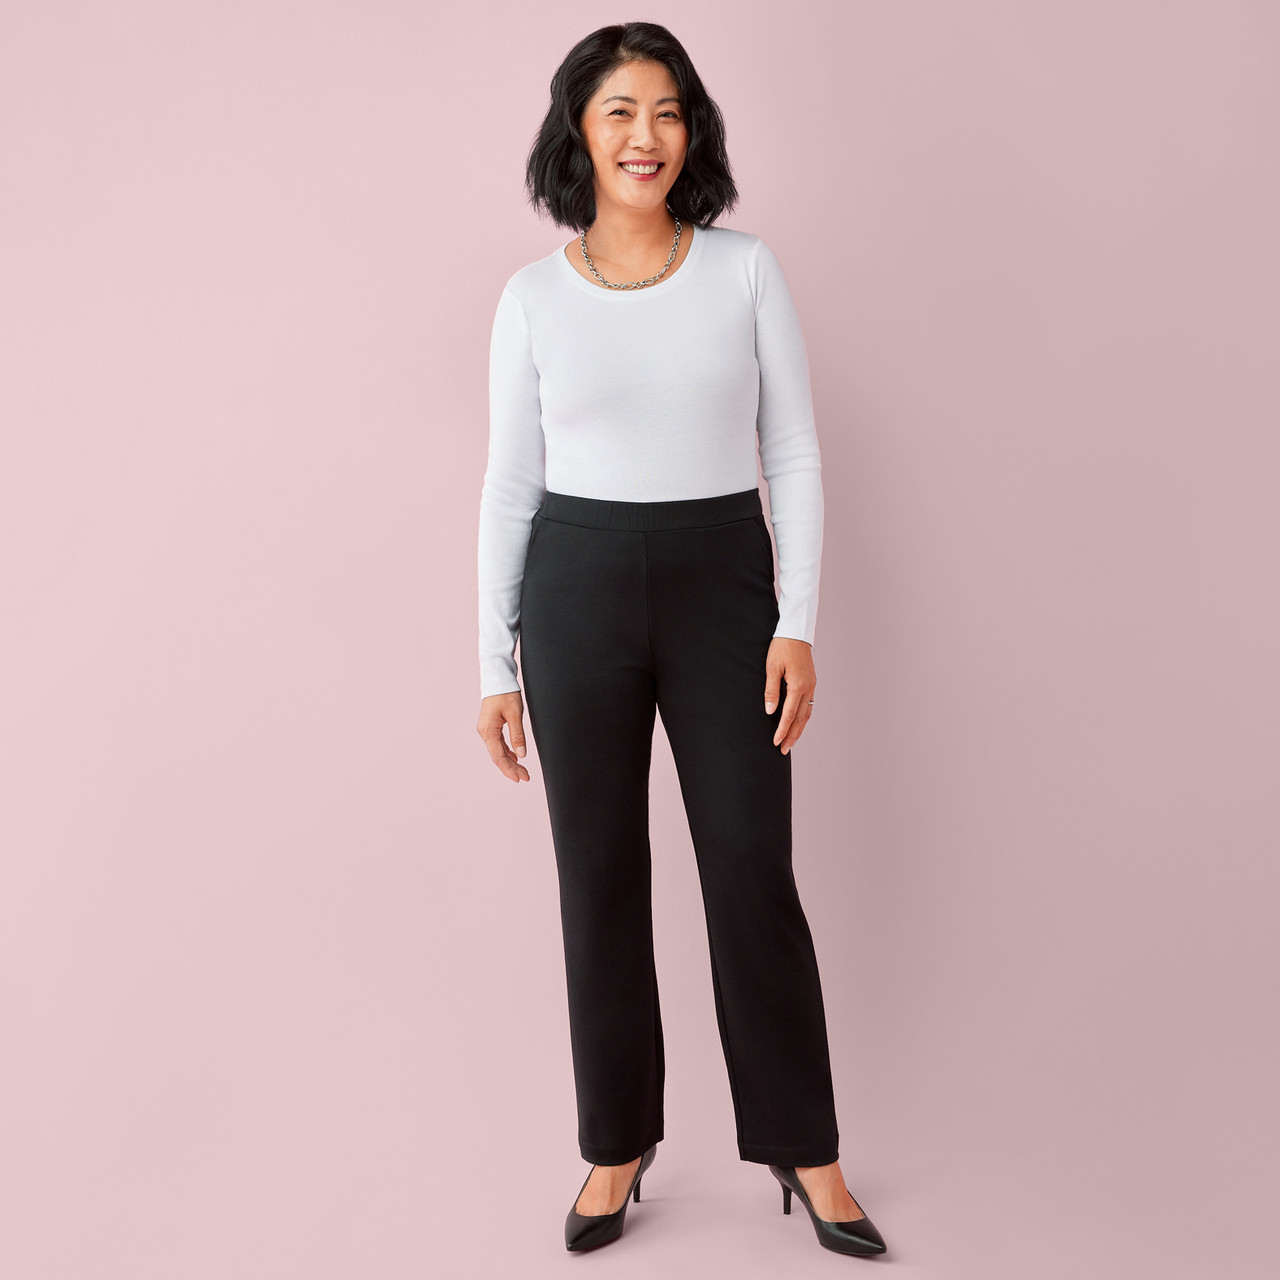 May You Be Women's Ultra Stretch Pull On Skinny Ponte Knit Pants